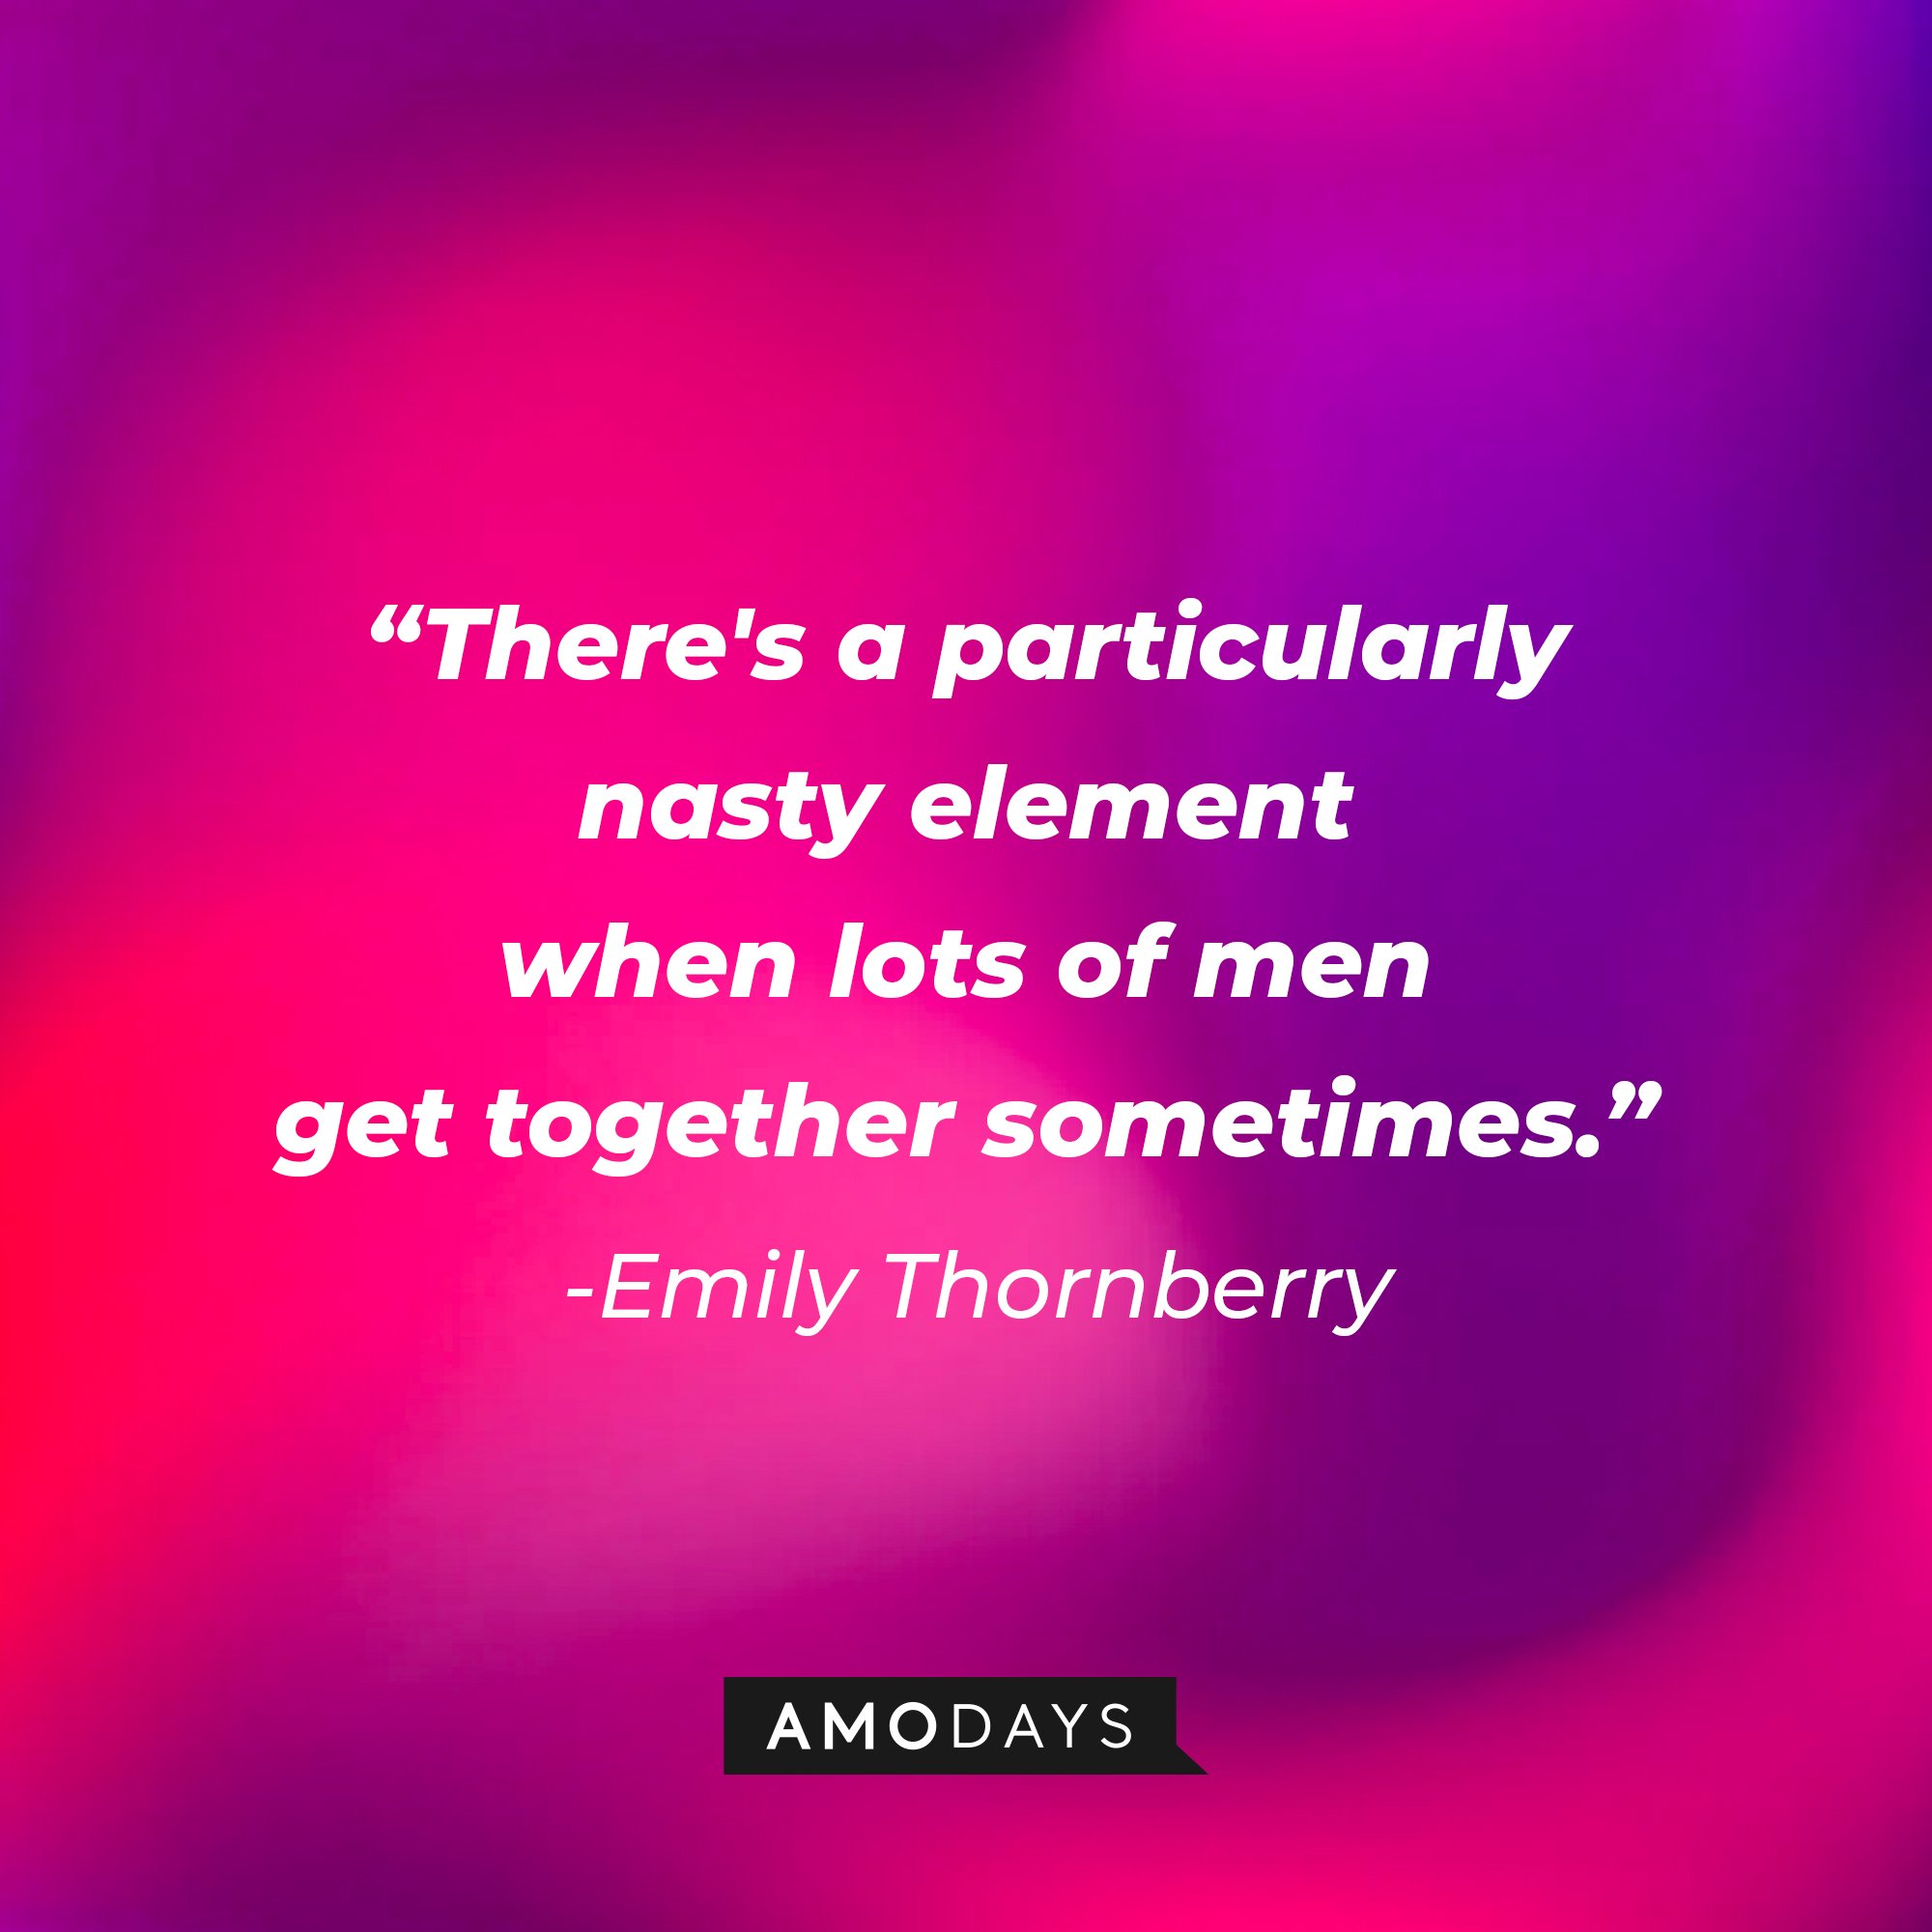 Emily Thornberry’s quote: "There's a particularly nasty element when lots of men get together sometimes." | Image: AmoDays 